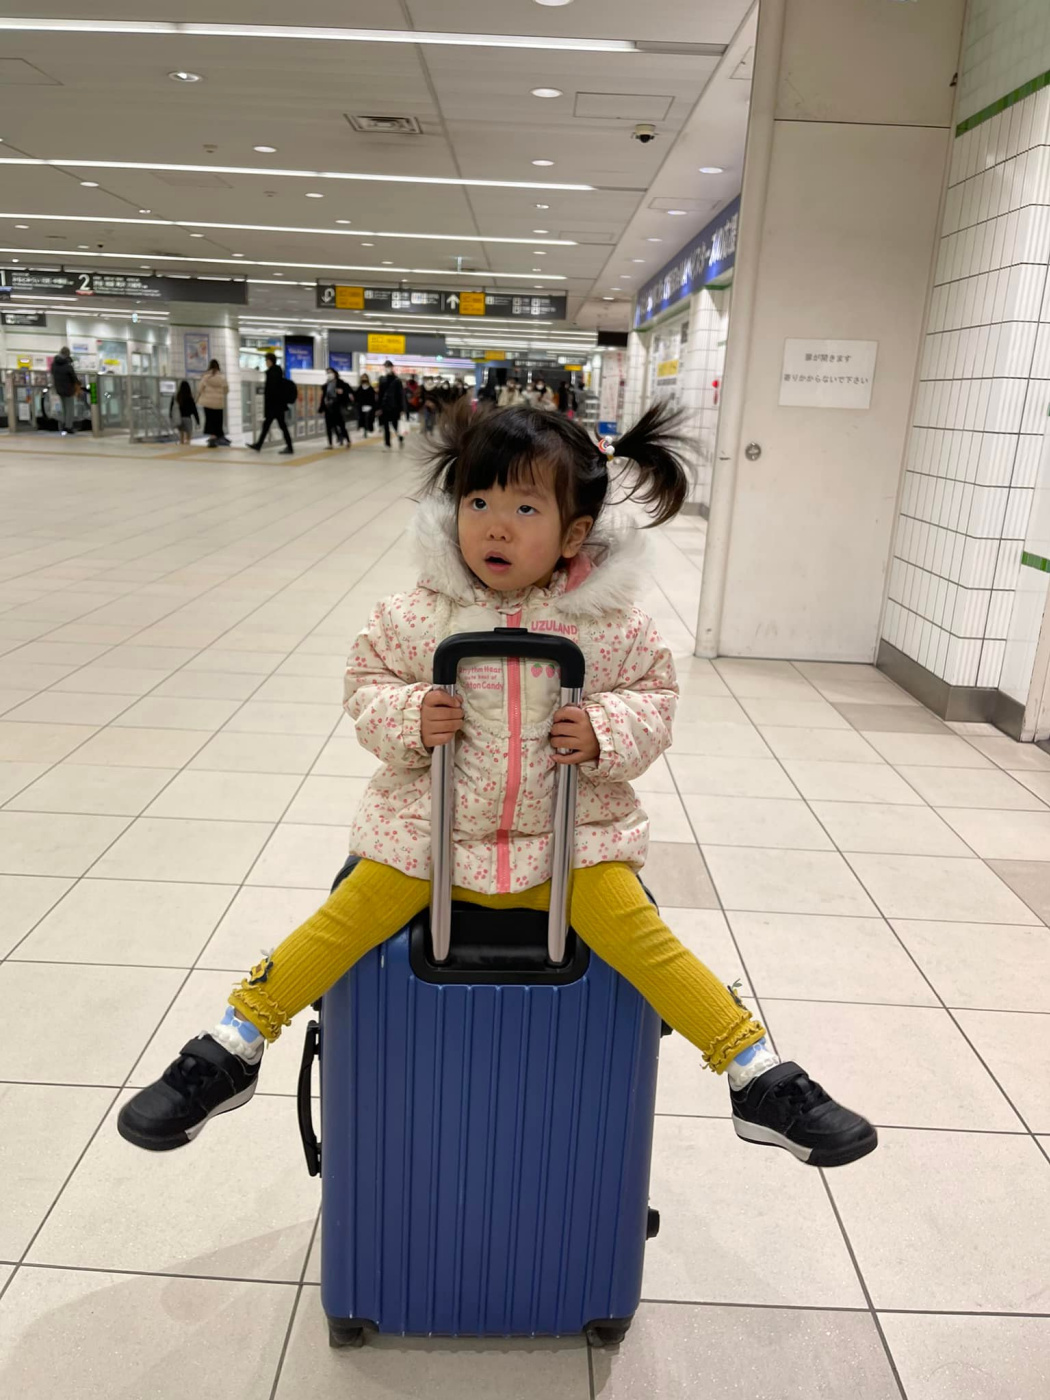 Jennifer Roberts Steiner. Picture Of My Daughter Playing On The Suitcase At The Airport